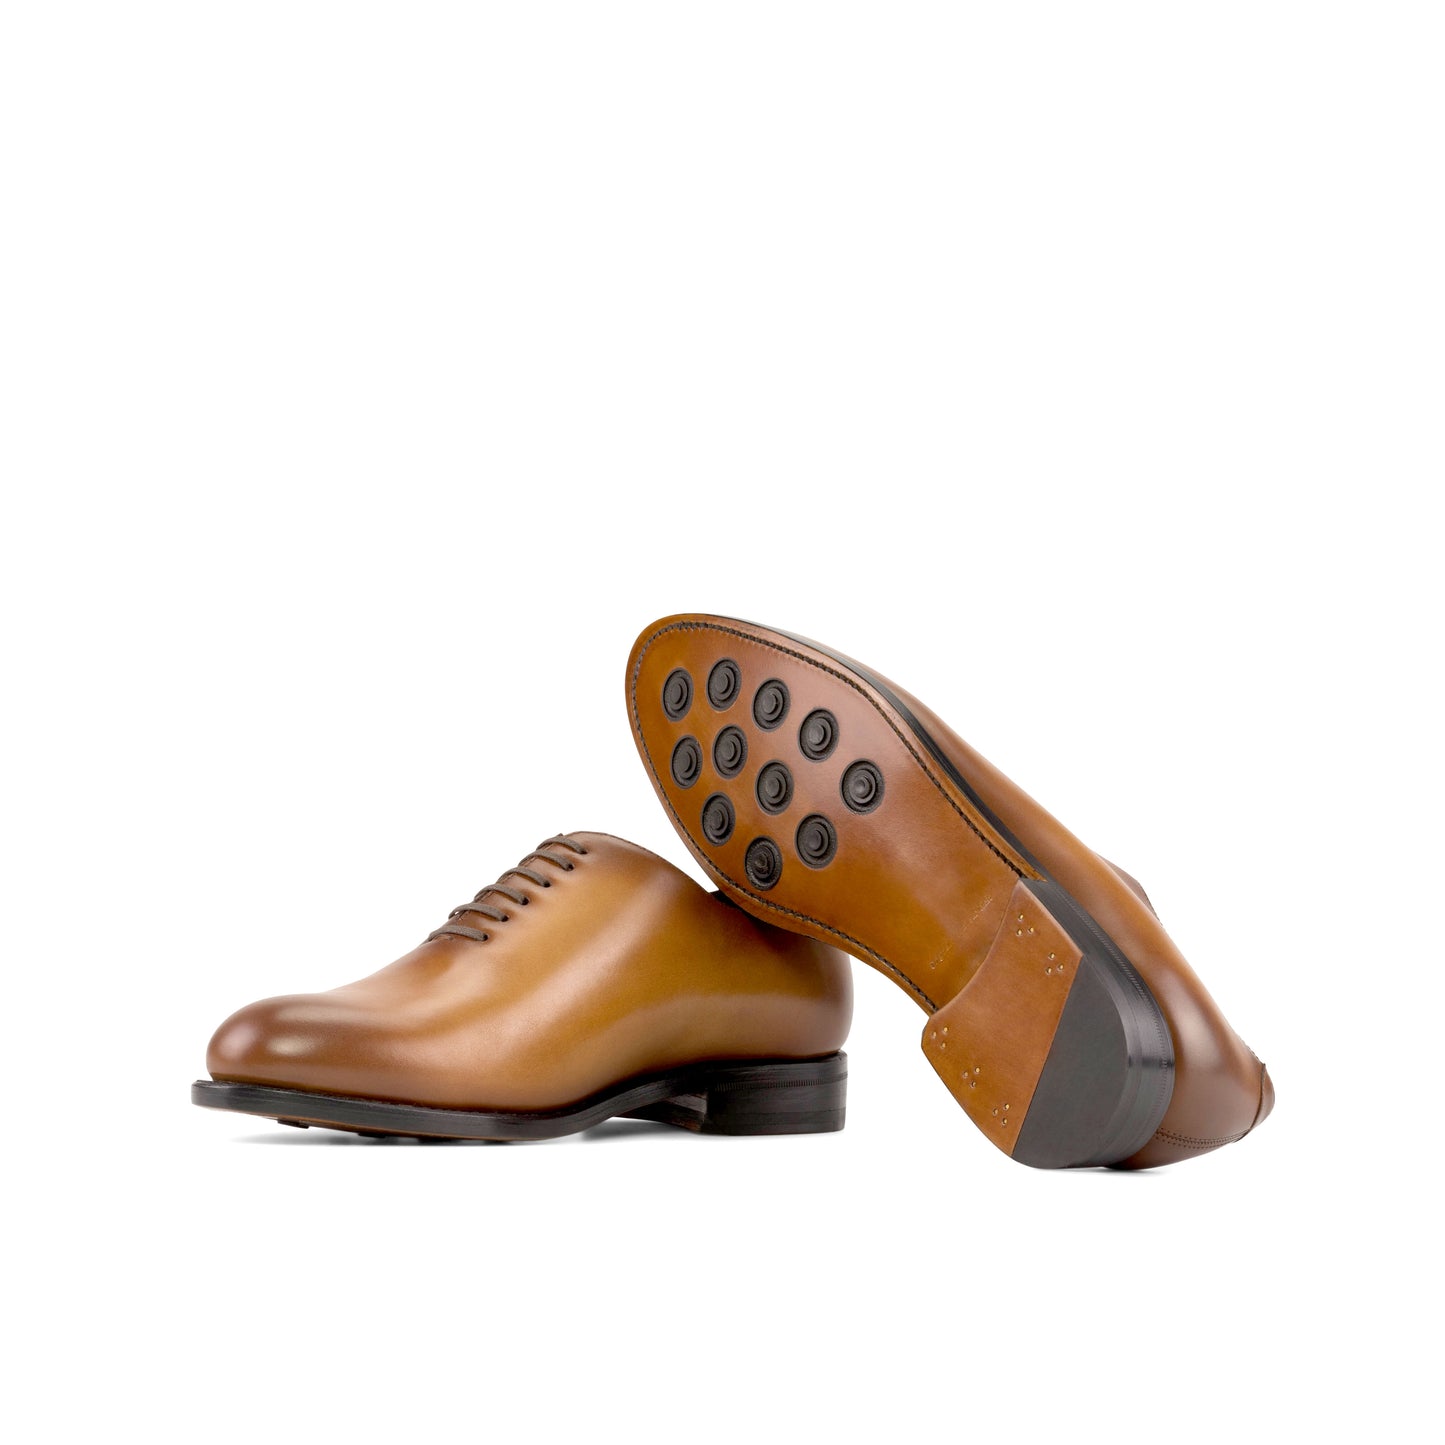 Whole cut cognac Goodyear Welt, leather sole with buttons rubber injections